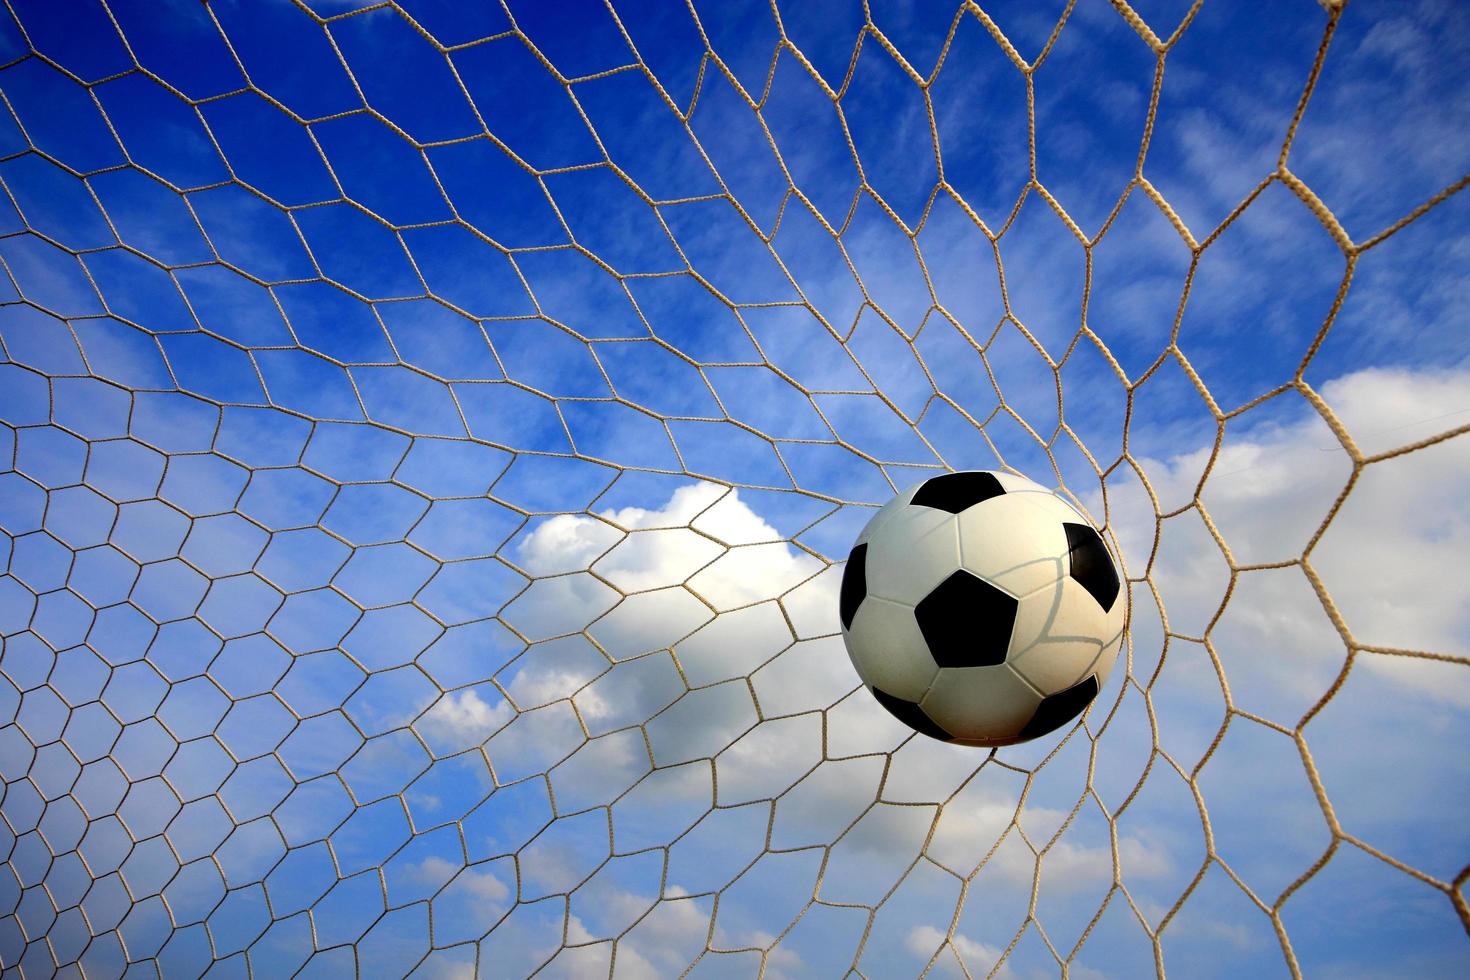 Symbolic of success and victory for classic soccer ball have black and white color going into the in-goal net after shooted in the game with a blue sky background. success concept. photo